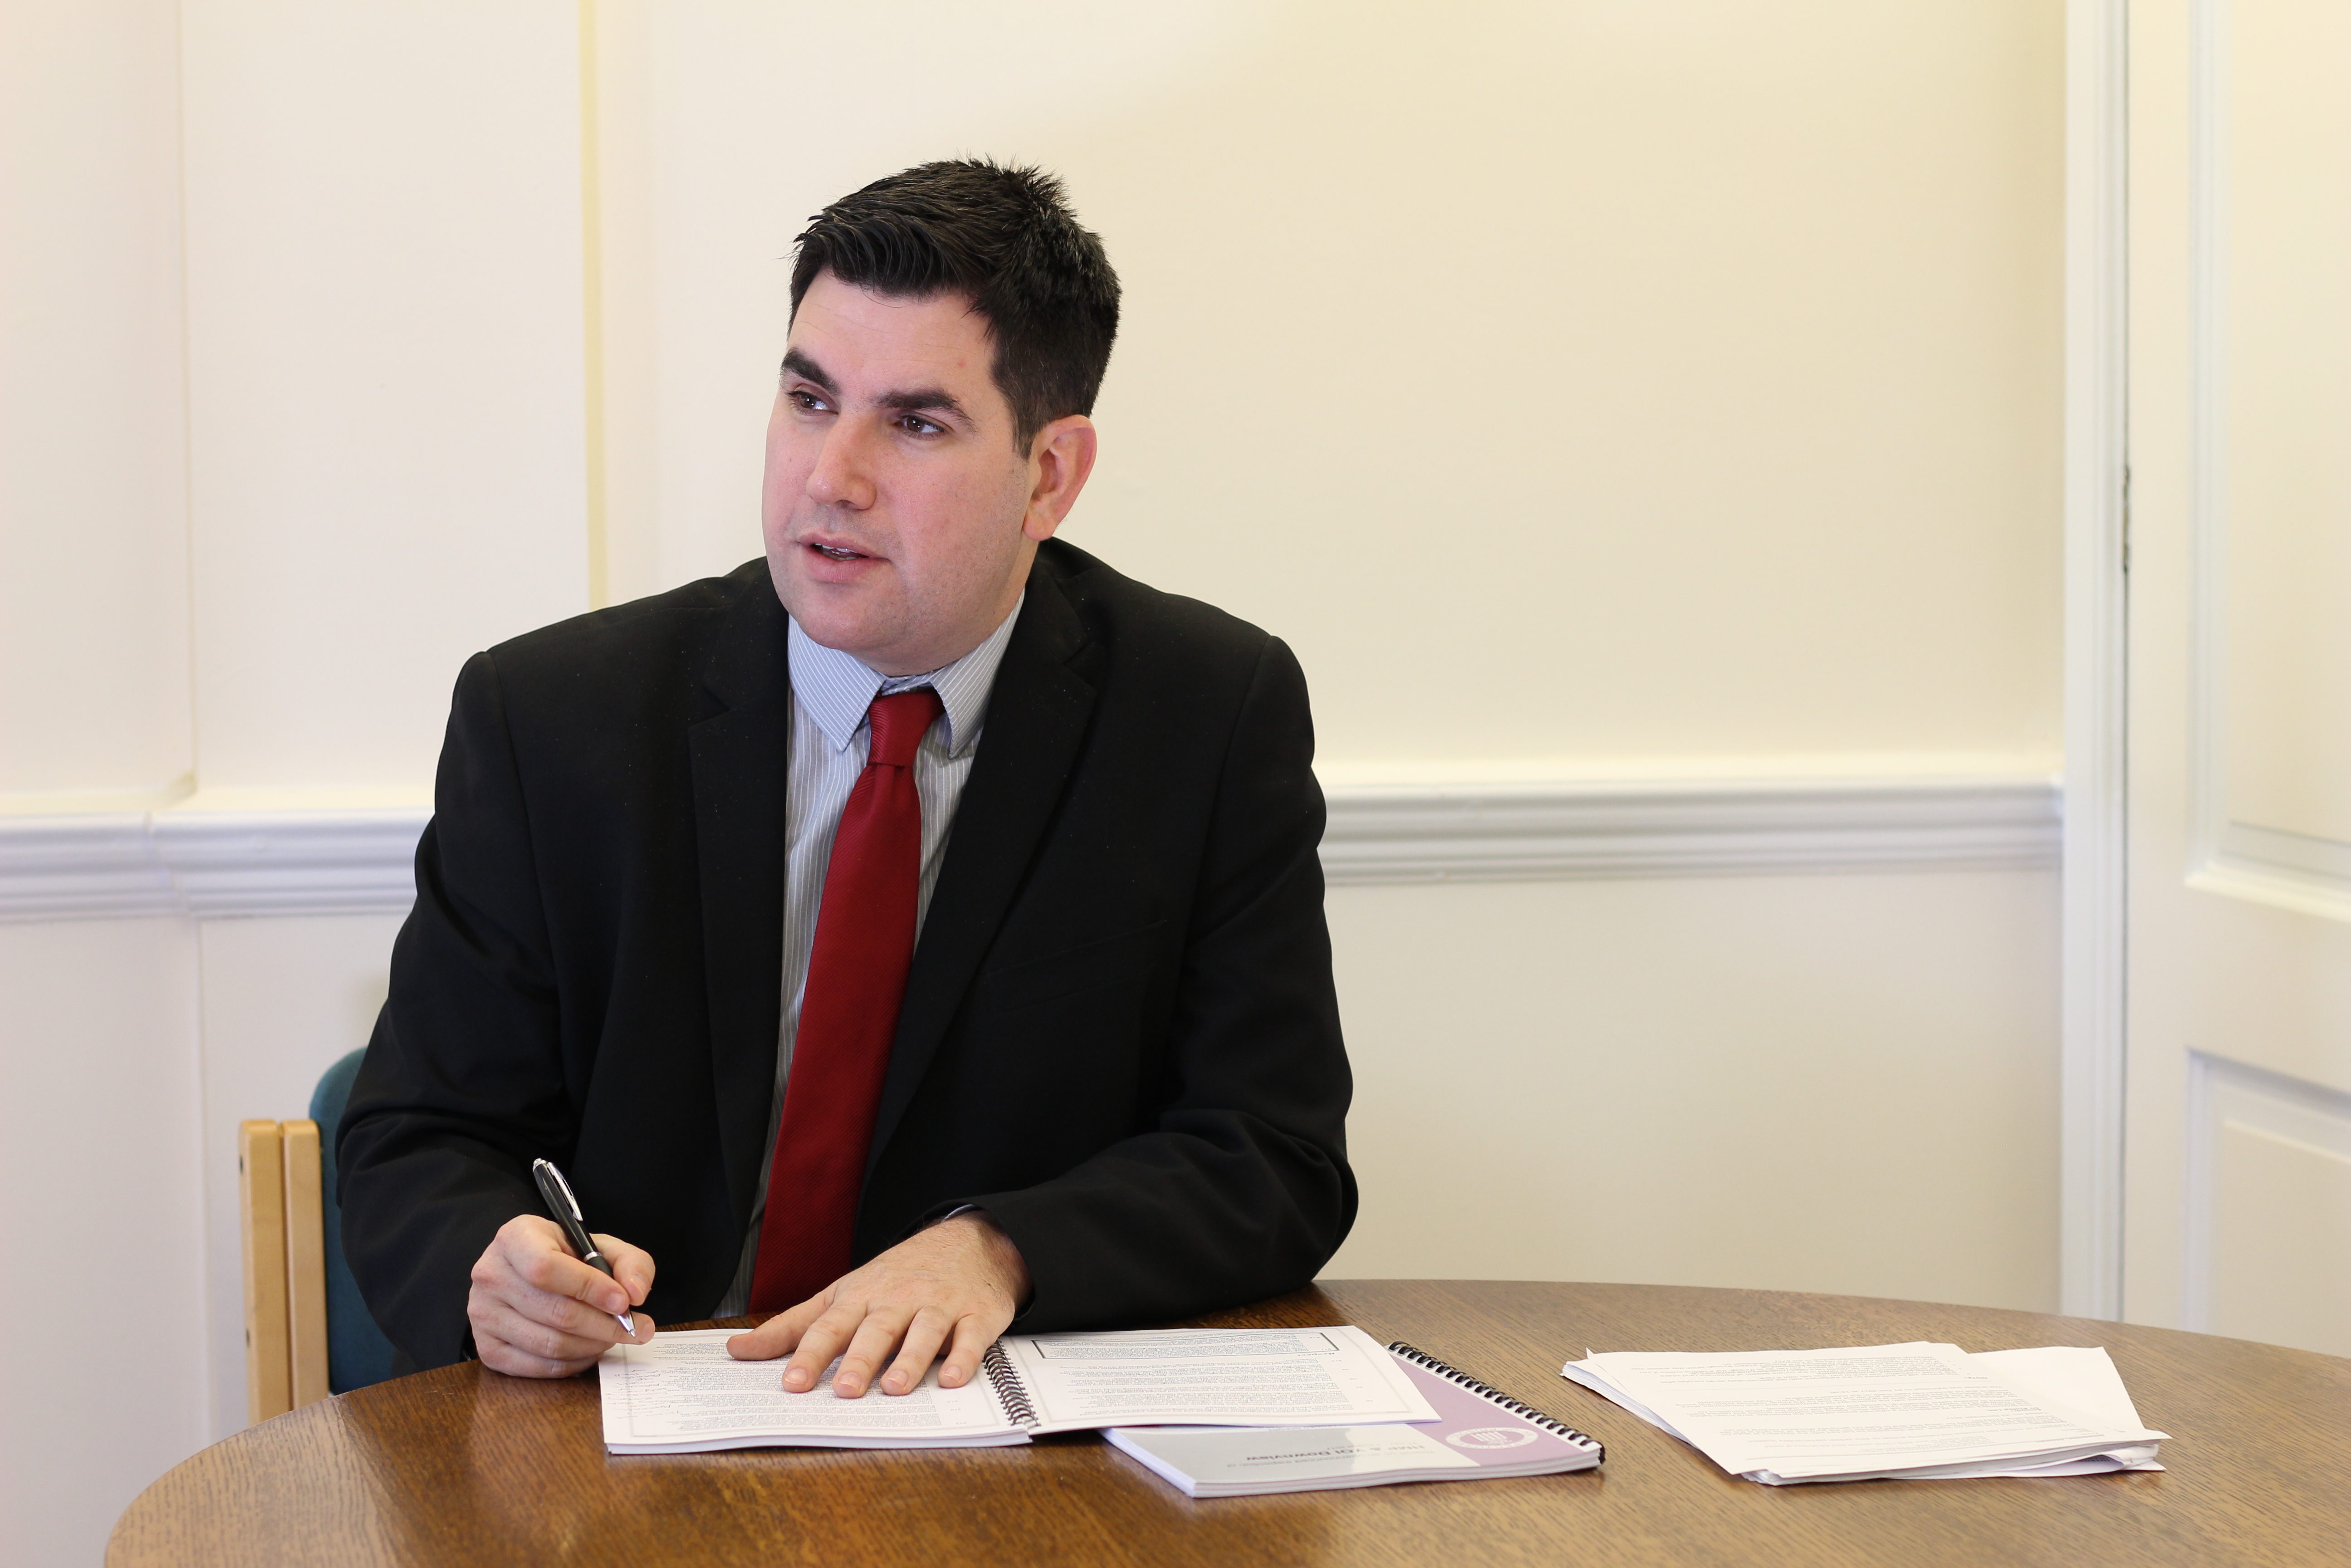 Richard Burgon, this photo is licensed under a Creative Commons Attribution 4.0 License, meaning it can be used freely with attribution.